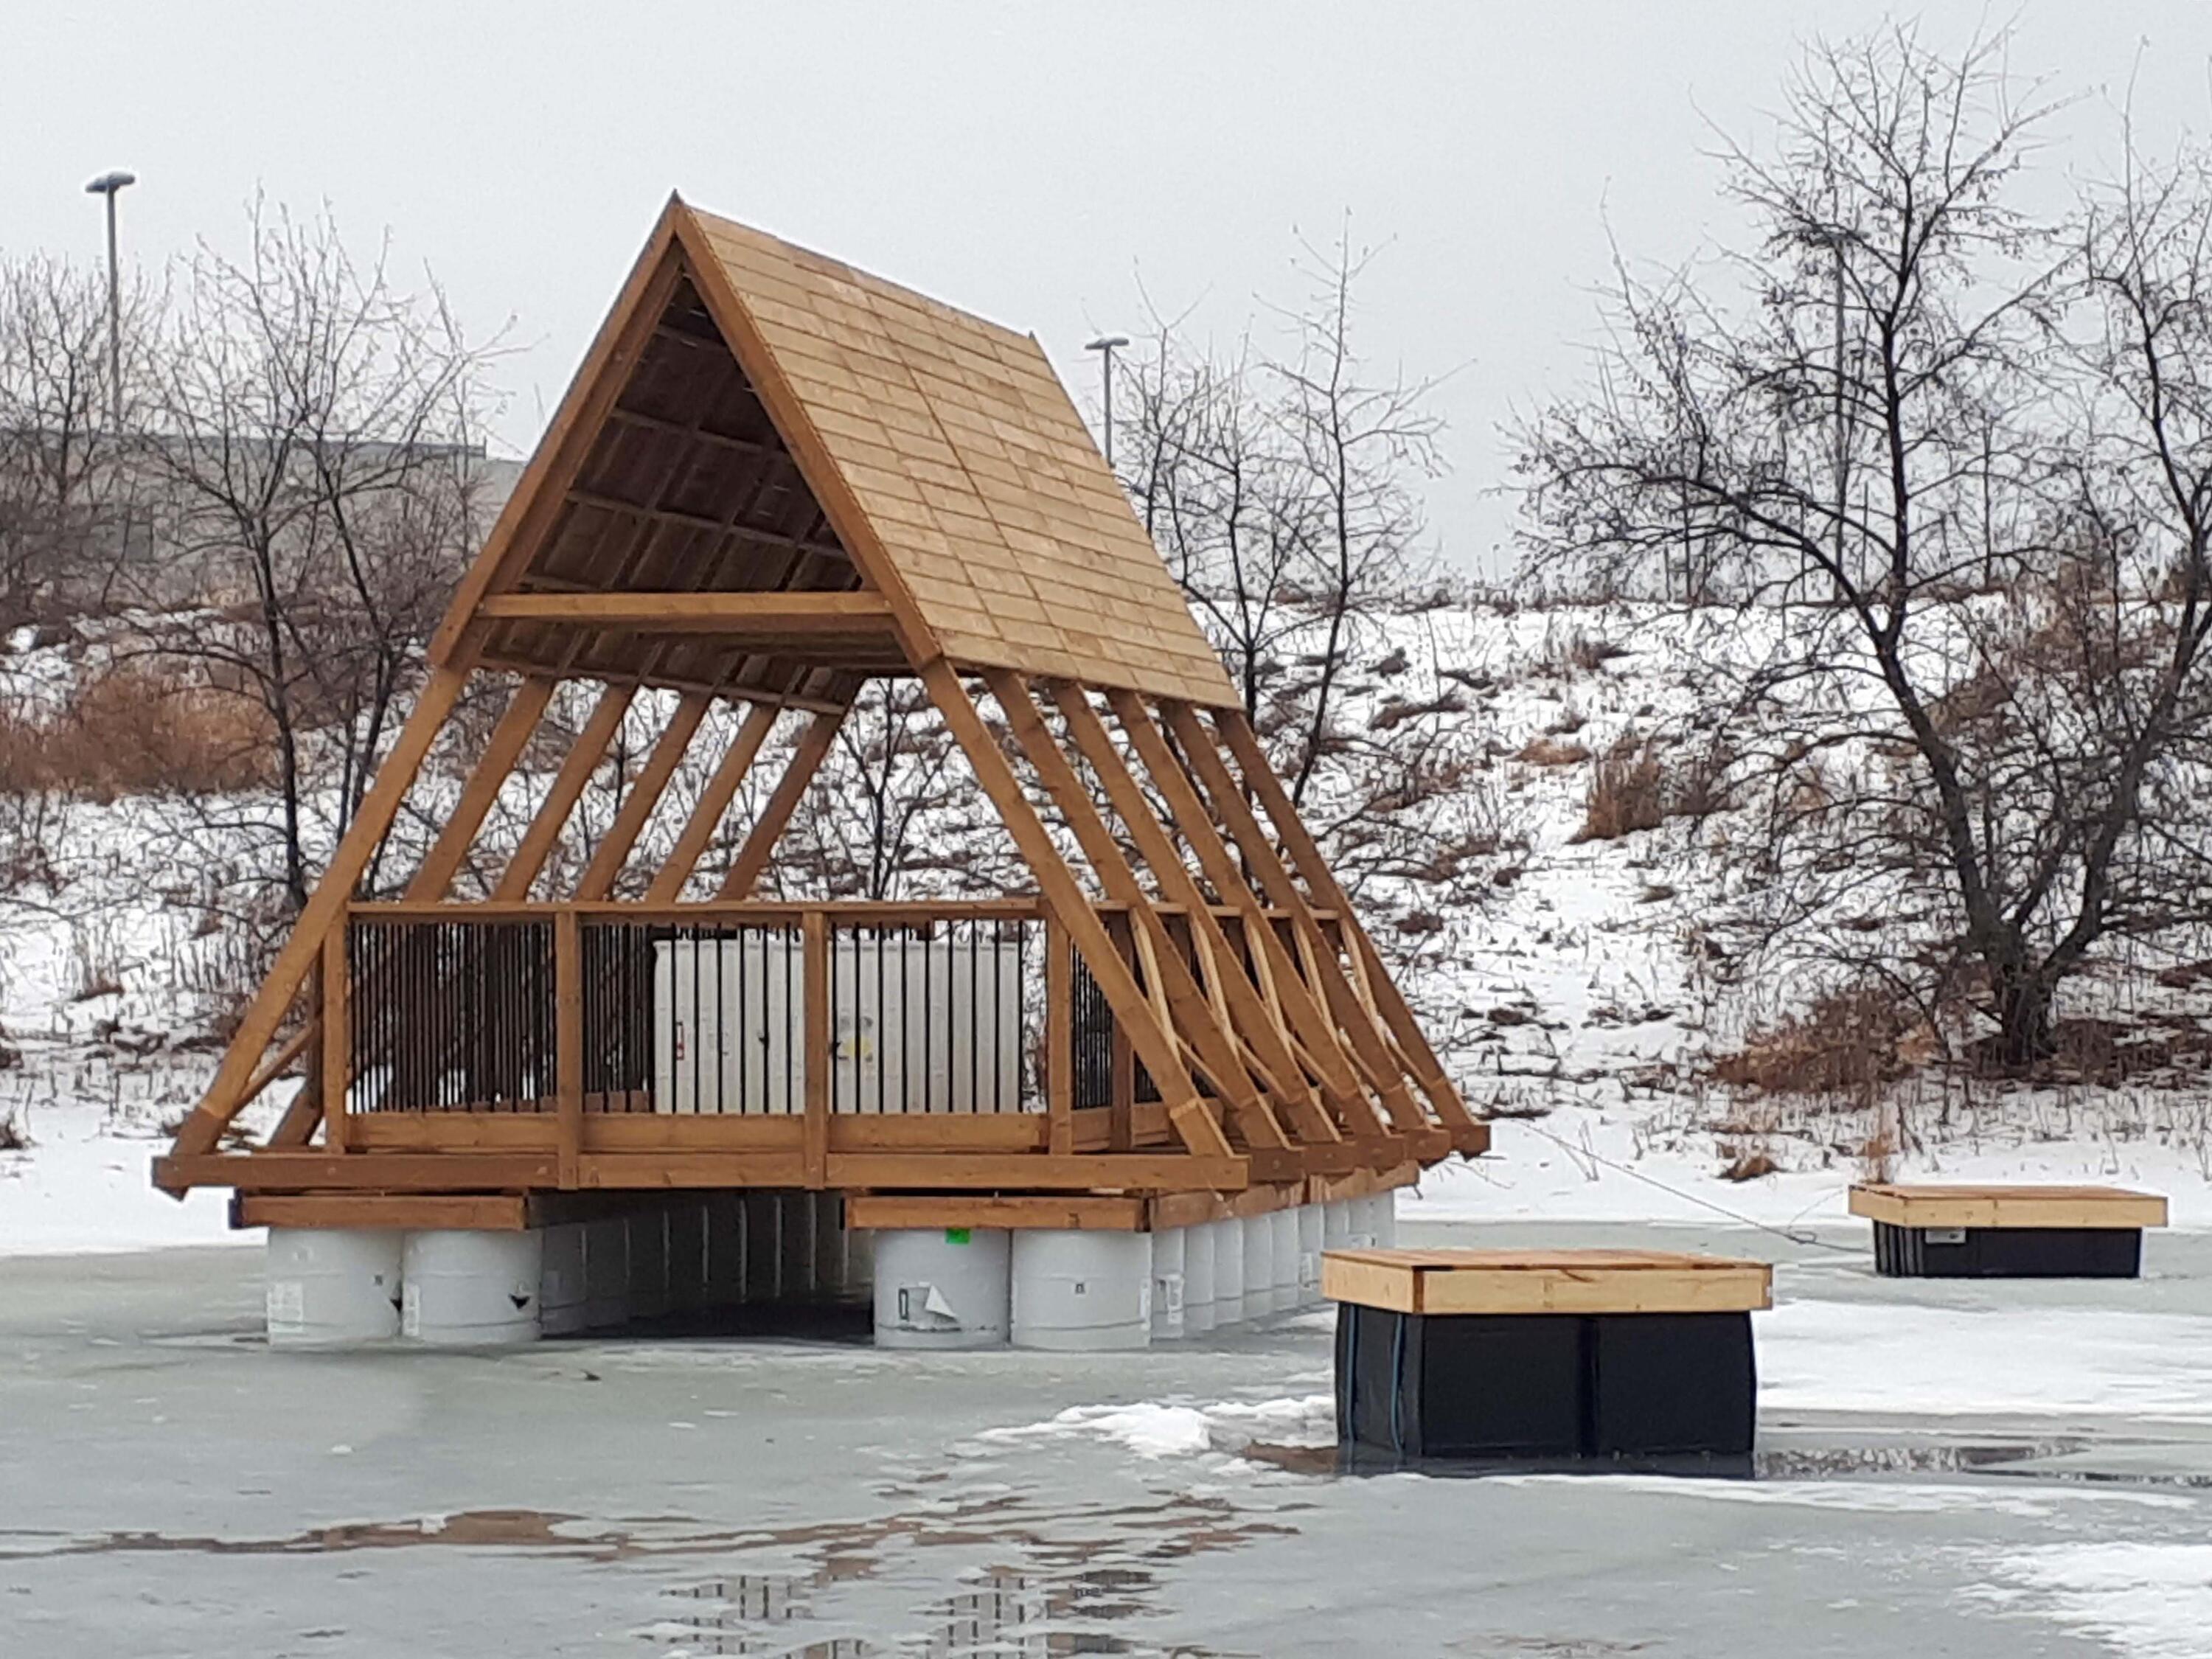 Testing the freeze-thaw response of the pavilion’s buoyancy materials in winter